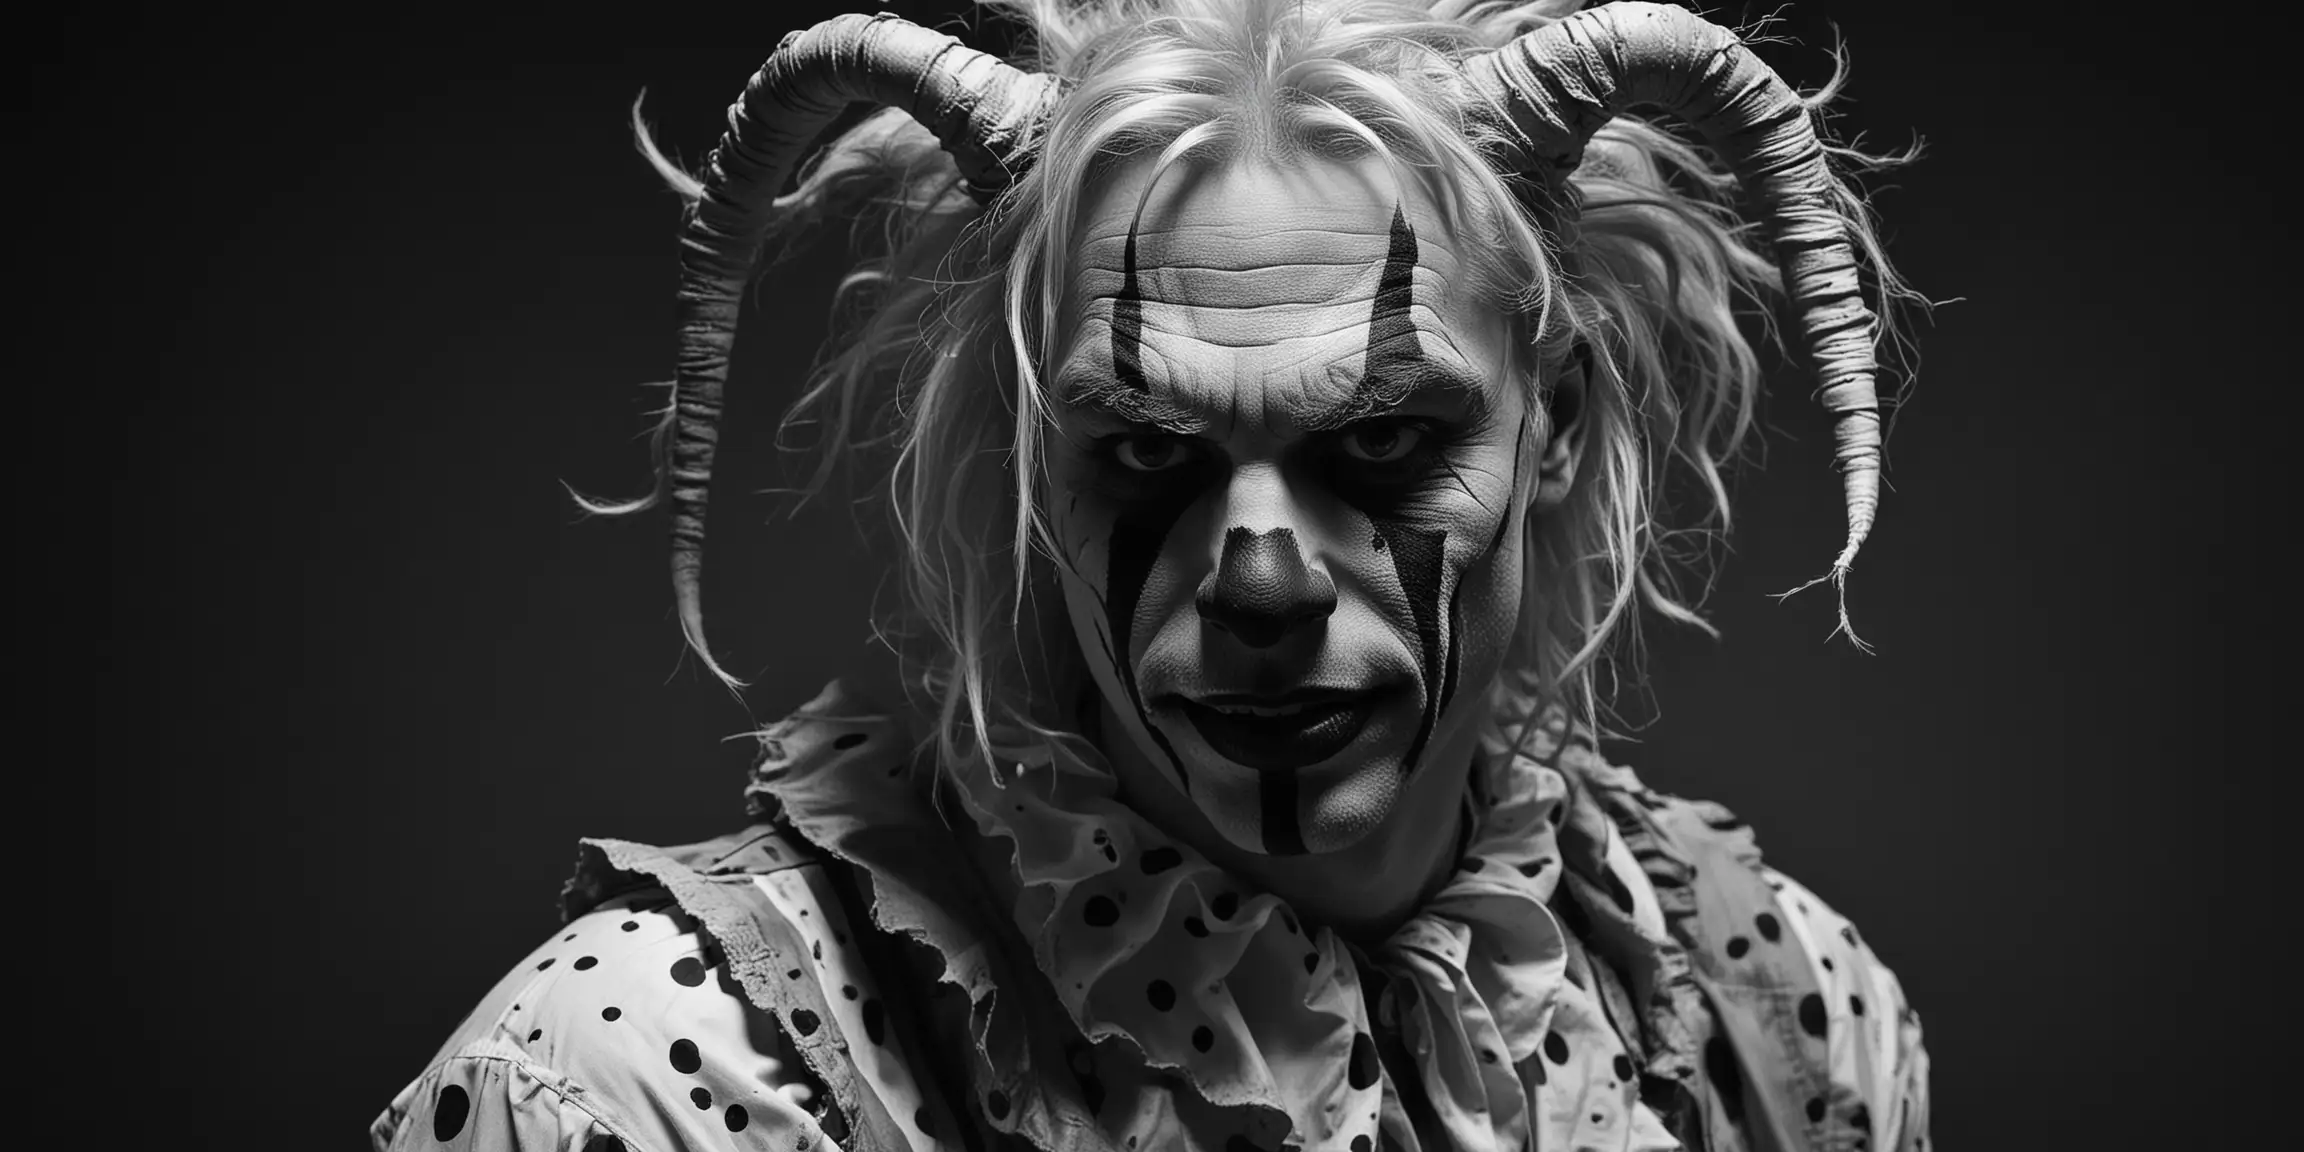 editorial, top of body, clown pants, model, surreal, silly, crazy, powerful sad guy, very depressed, black and white, black background, dark figure, scared, upset, disturbed, creepy white face paint, fair light white skin, with many long wavy horns, freak, danger, clown, laughing, side profile, surreal art photography, devil, demonic, charcoal, bipolar disorder, depressed, dark, sad, evil, lonely, look away, side profile